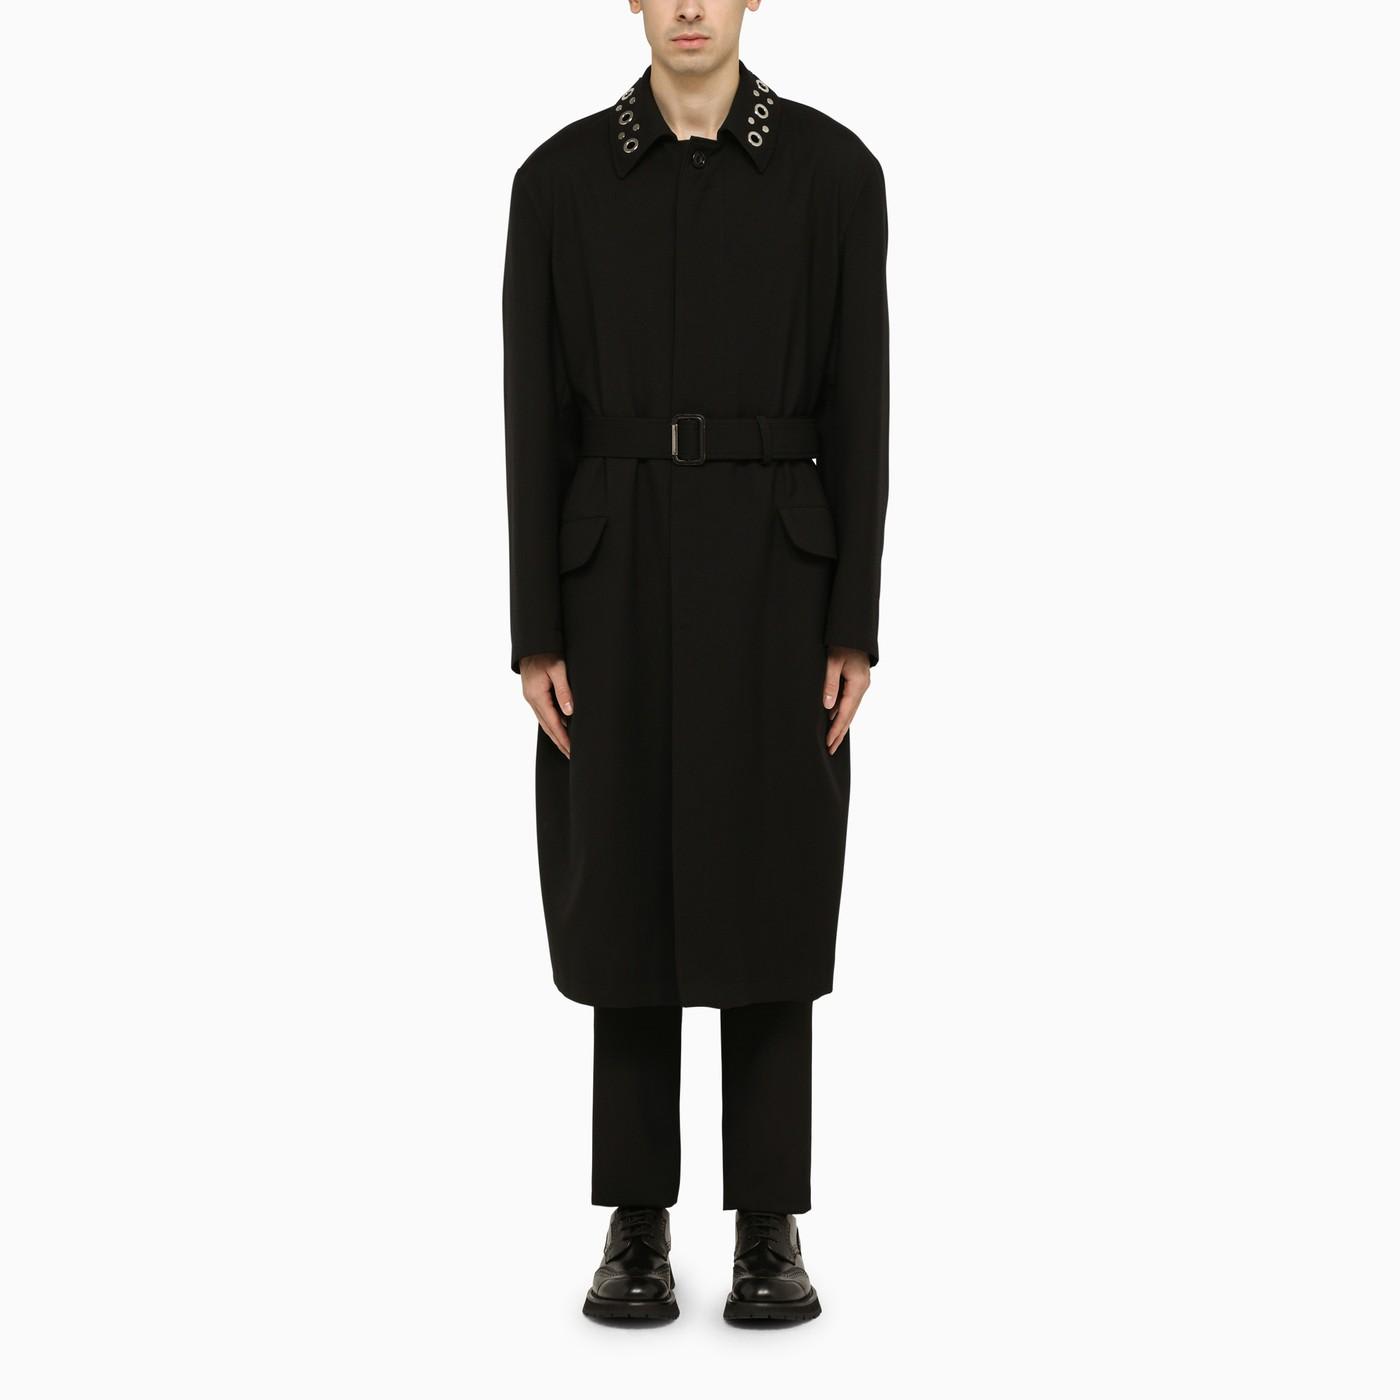 ALEXANDER MCQUEEN BLACK SINGLE-BREASTED TRENCH COAT